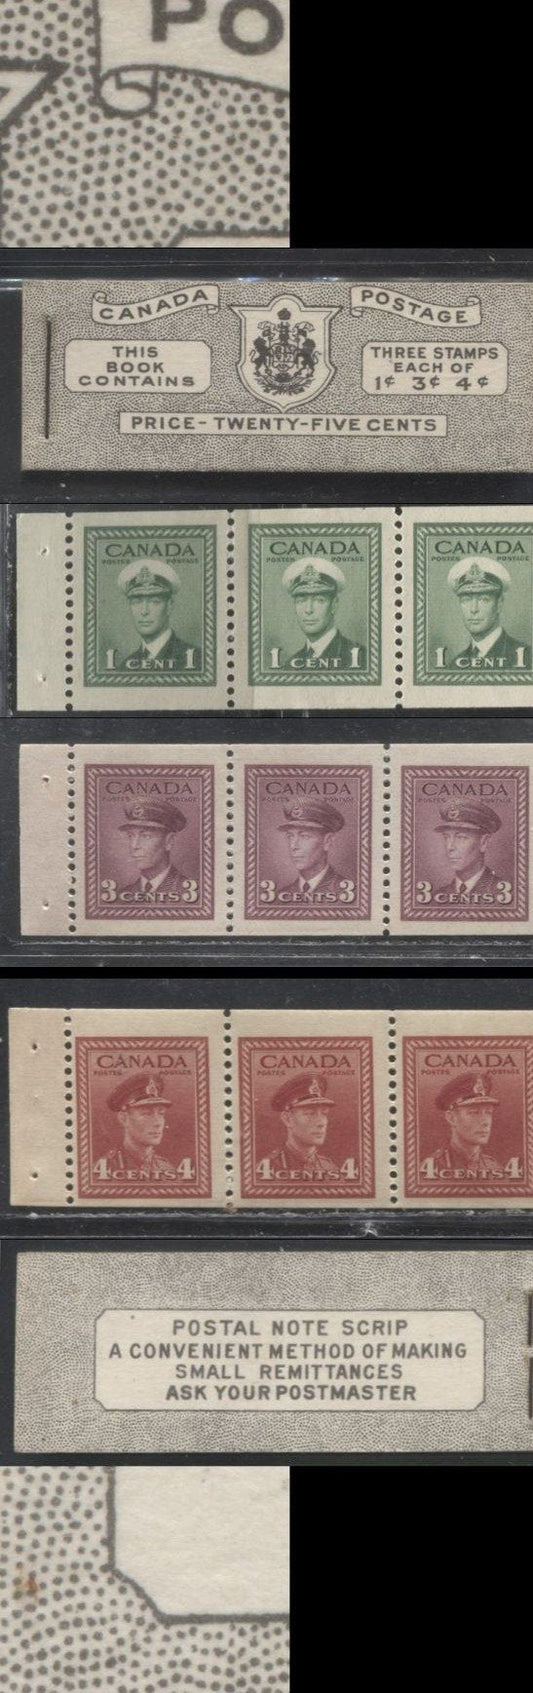 Lot 95 Canada #BK38a 1942-1949 War Issue Complete 25c, English Booklet Containing 1 Pane Each of 3 of 1c Green, 3c Rosy Plum and 4c Carmine Red, Oily Horizontal Ribbed Paper, Harris Front Cover Type IVa , Back Cover Hai, 7c & 6c Rate Page